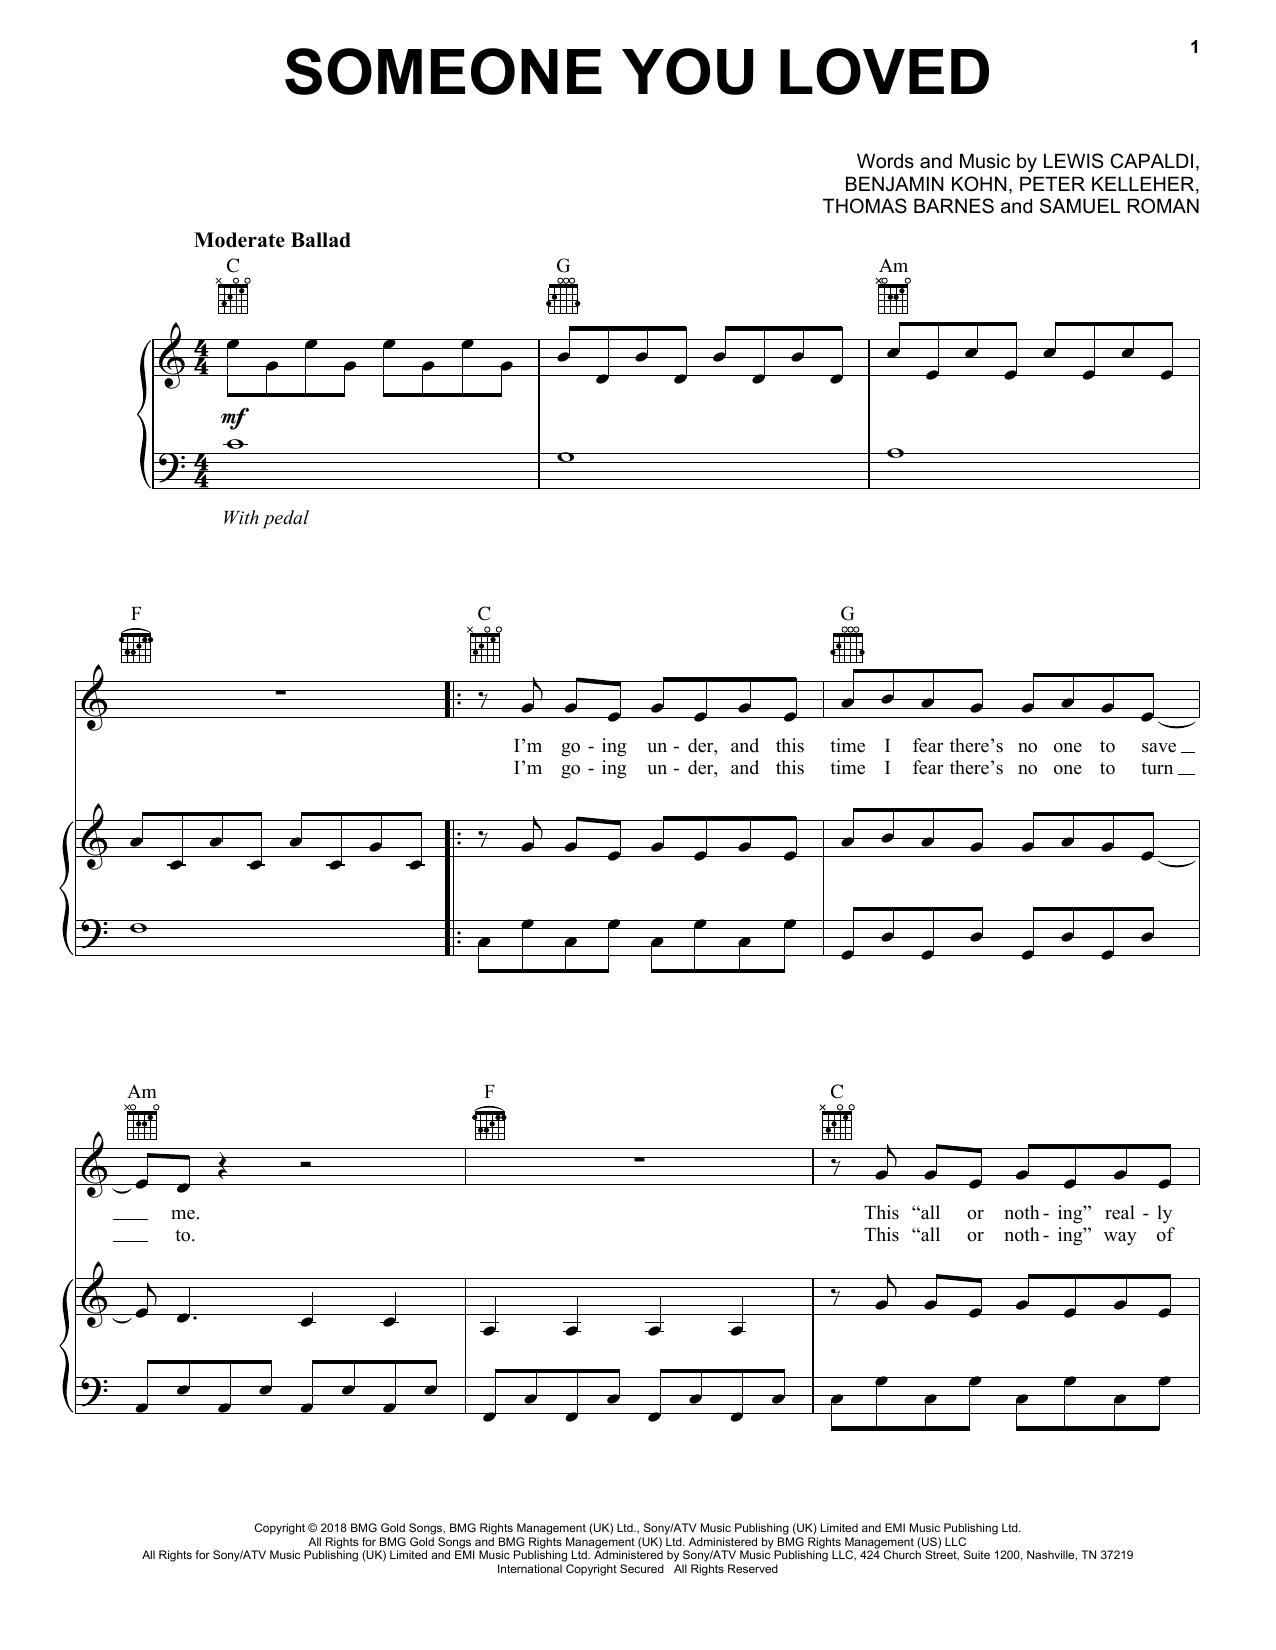 Lewis Capaldi Someone You Loved sheet music notes and chords. Download Printable PDF.